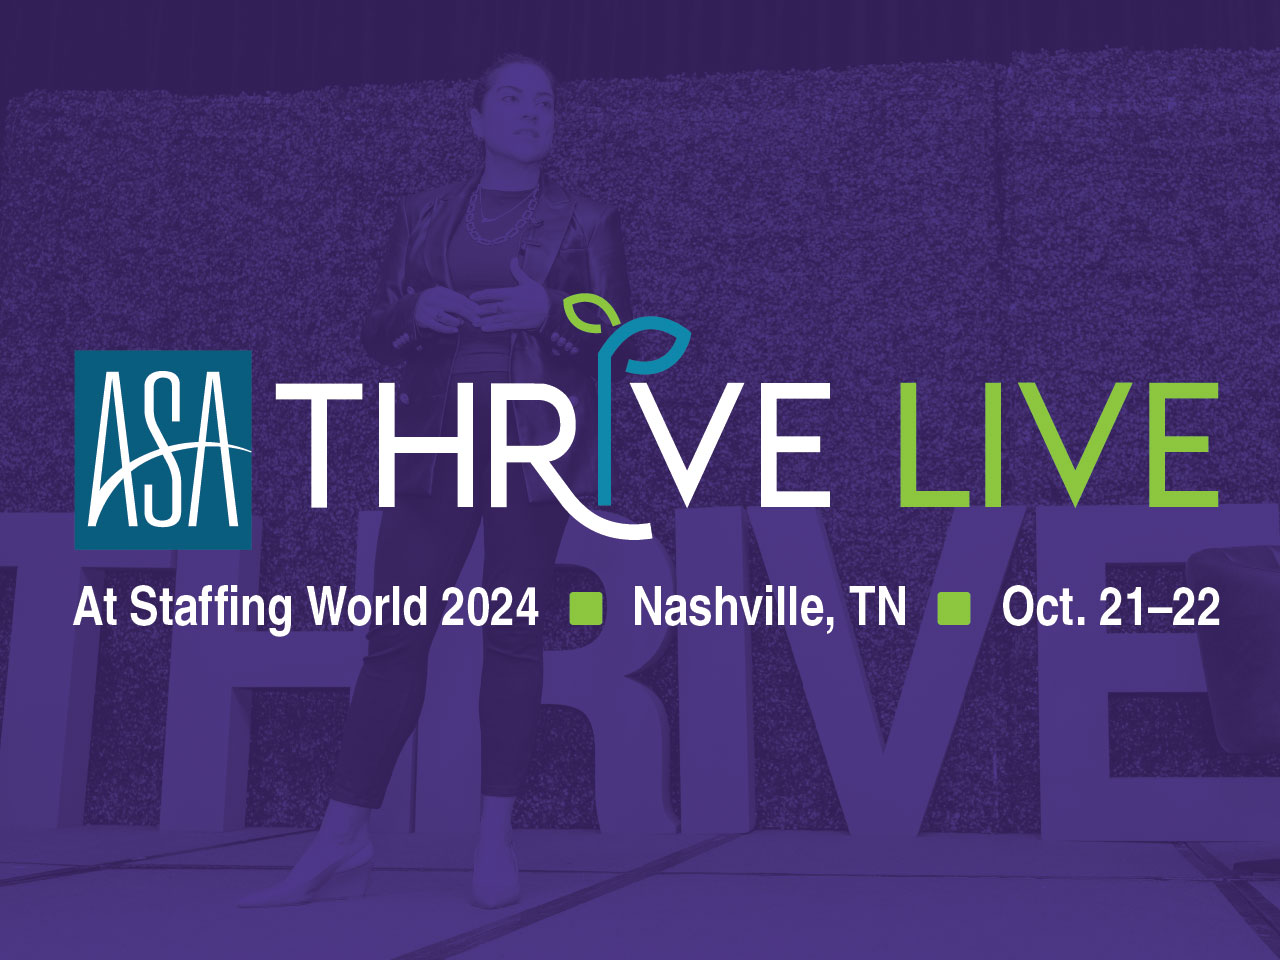 THRIVE LIVE at Staffing World 2024